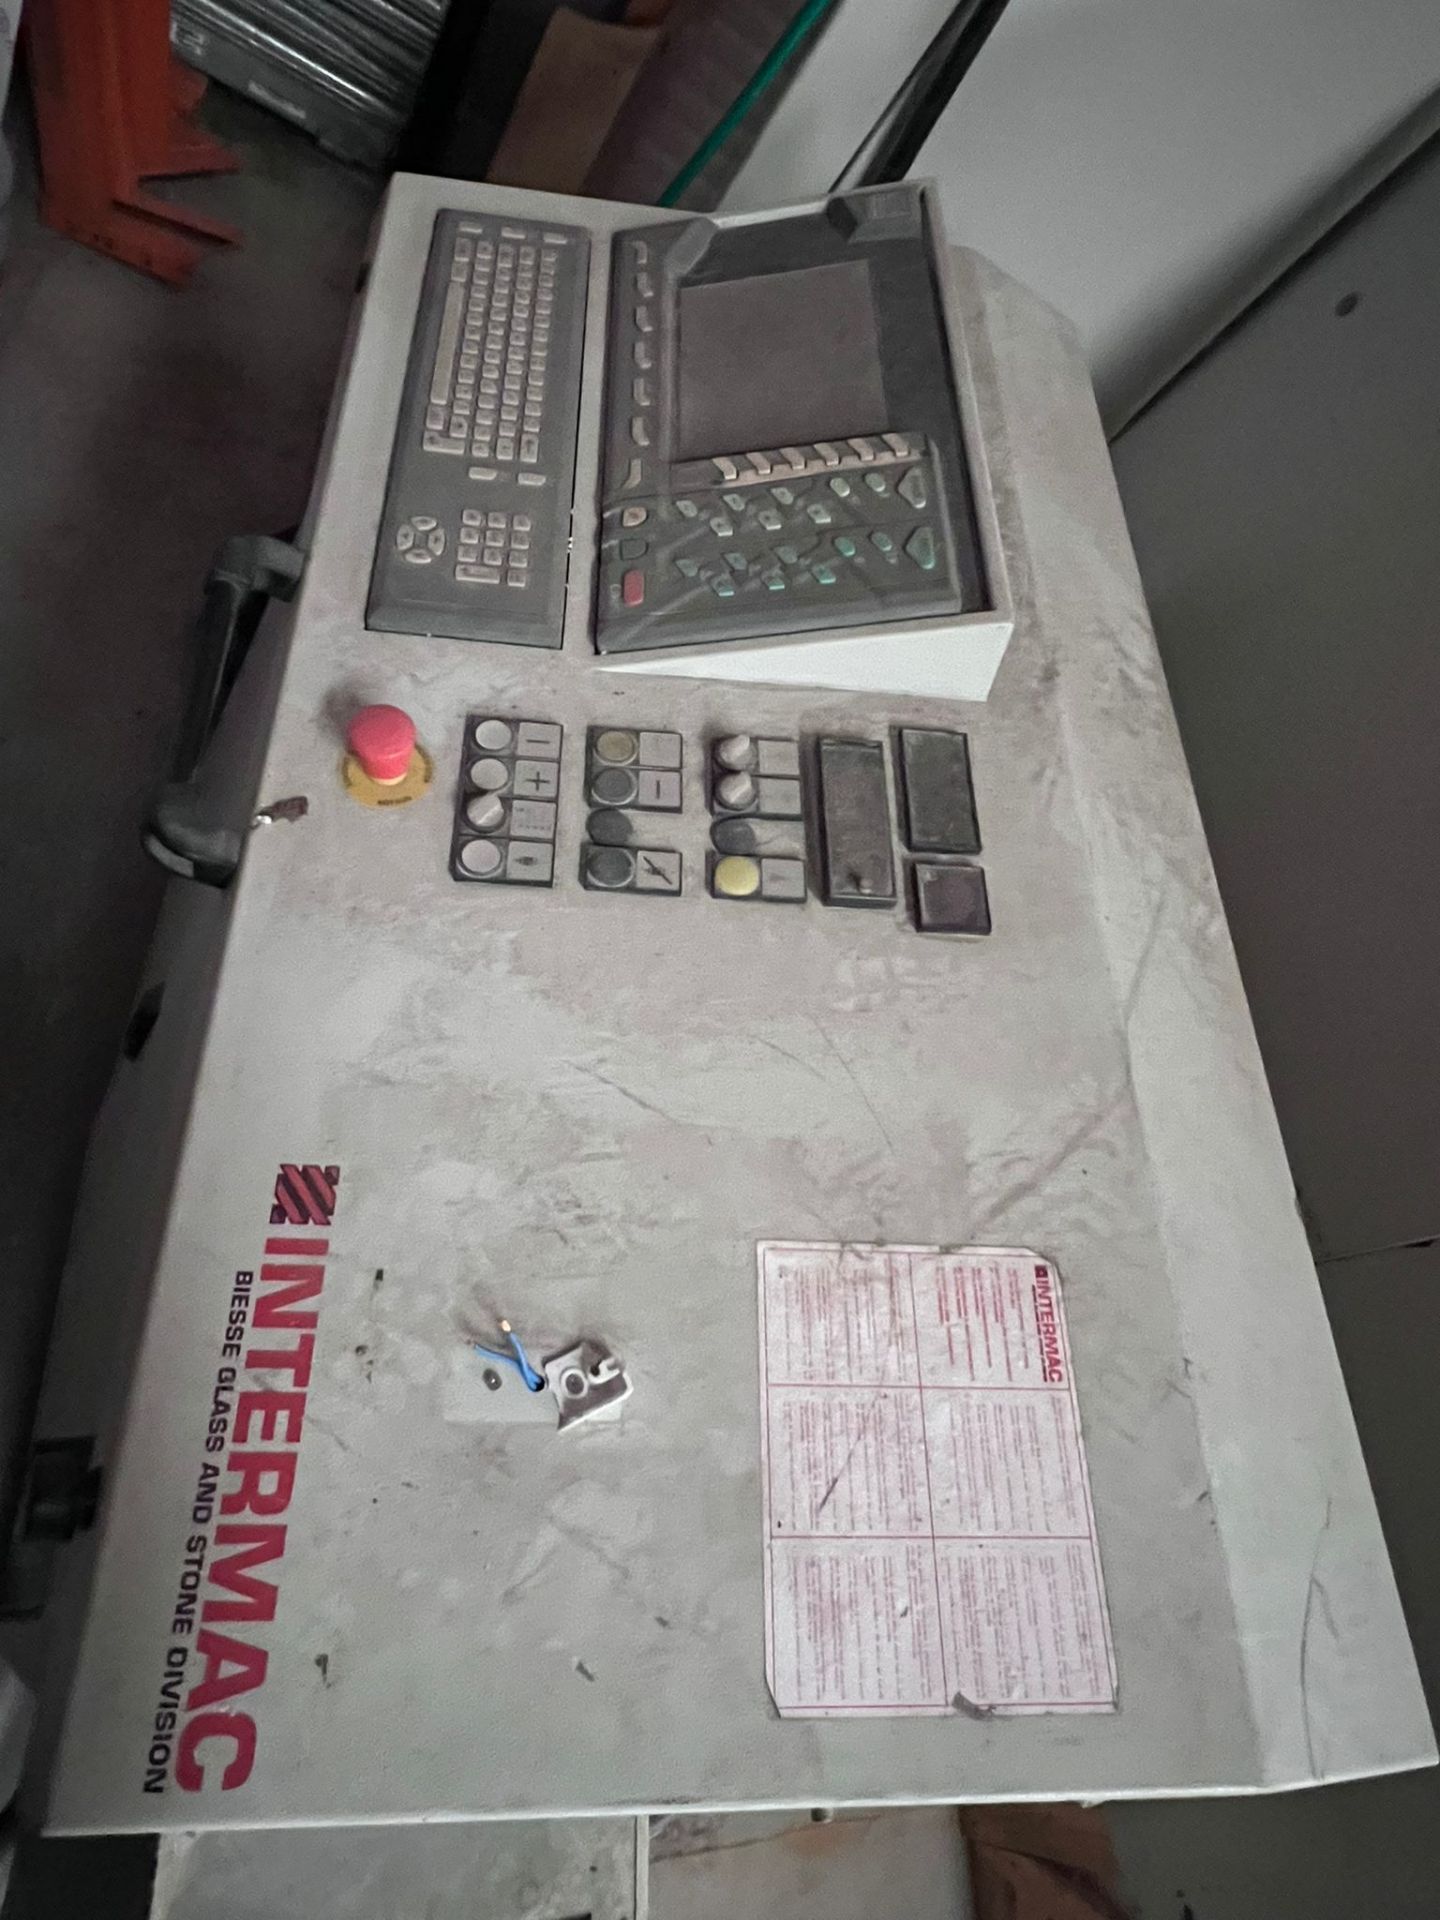 Special 5% Buyers Premium Intermac compact stone CNC machine serial no. 90775 with a Broomwade - Image 6 of 9